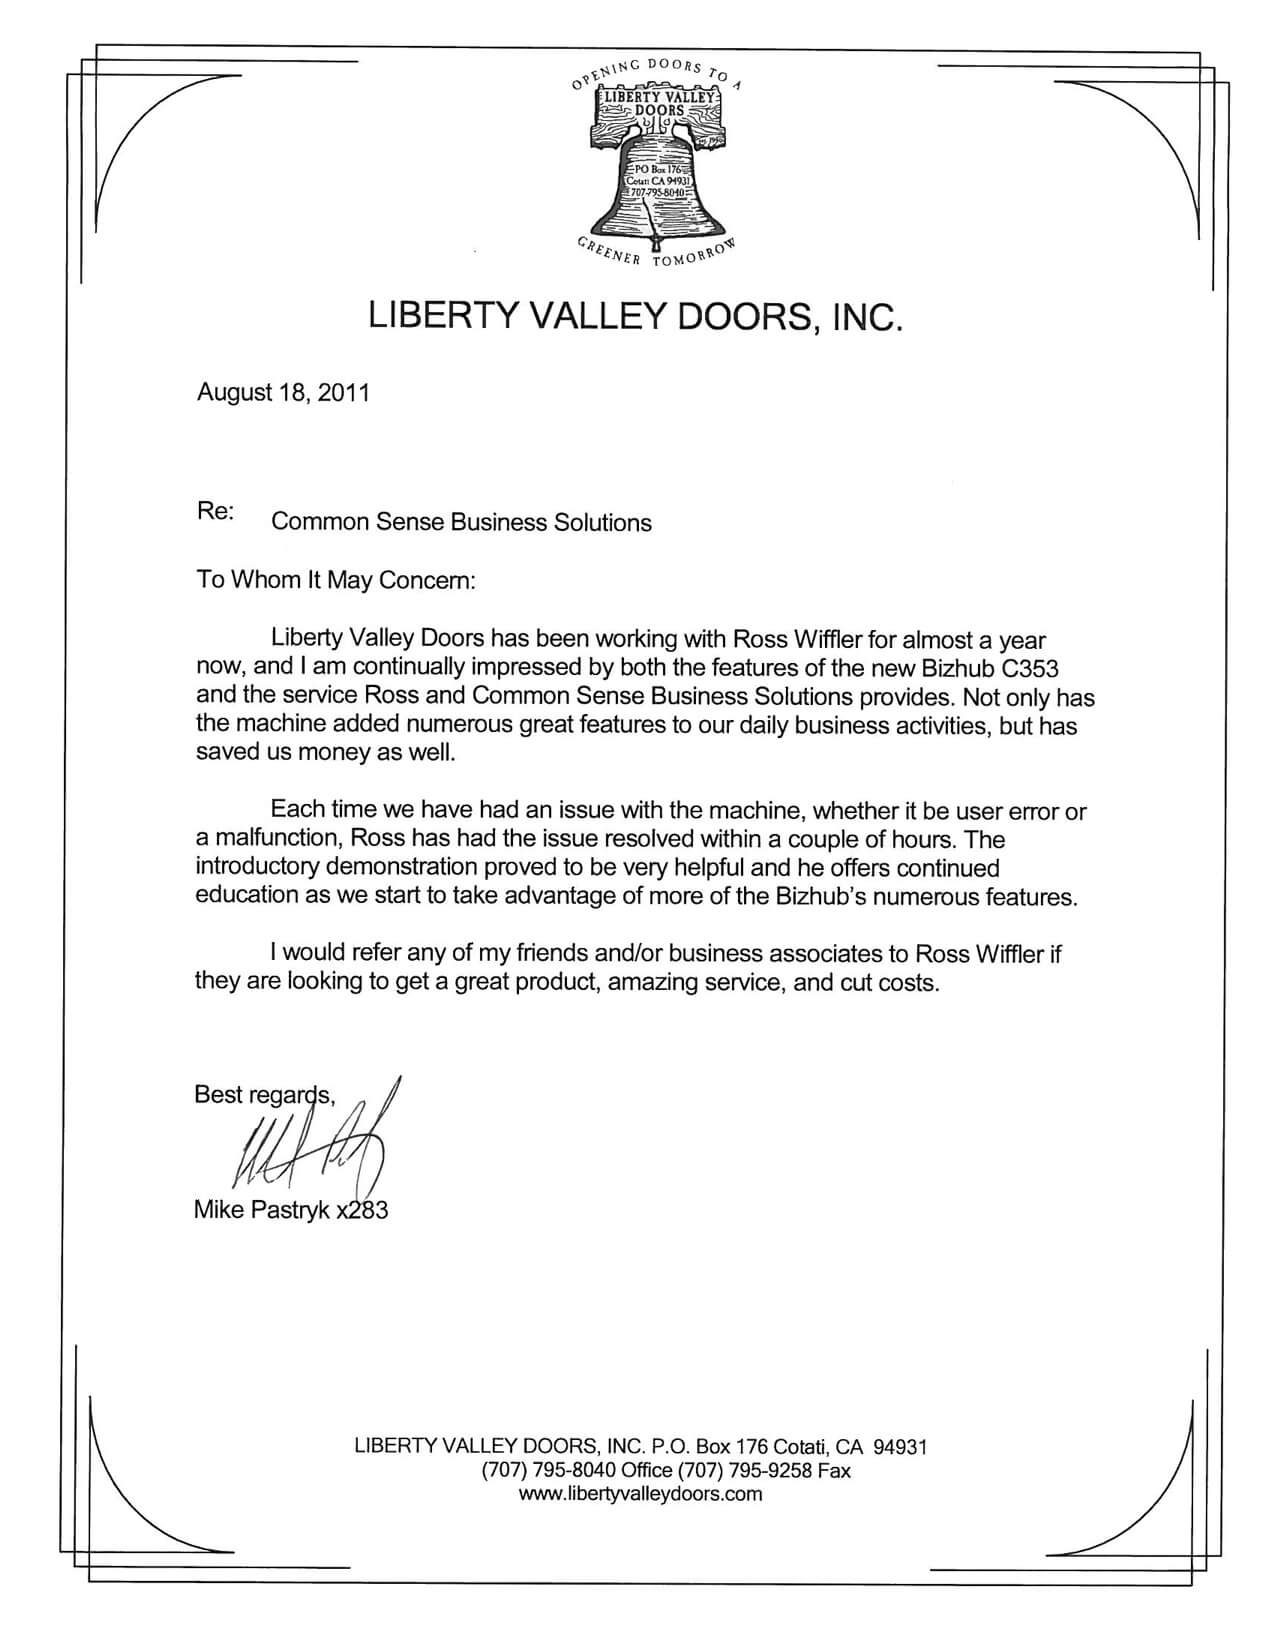 Testimonial Letters | Common Sense Business Solutions Throughout Business Testimonial Template